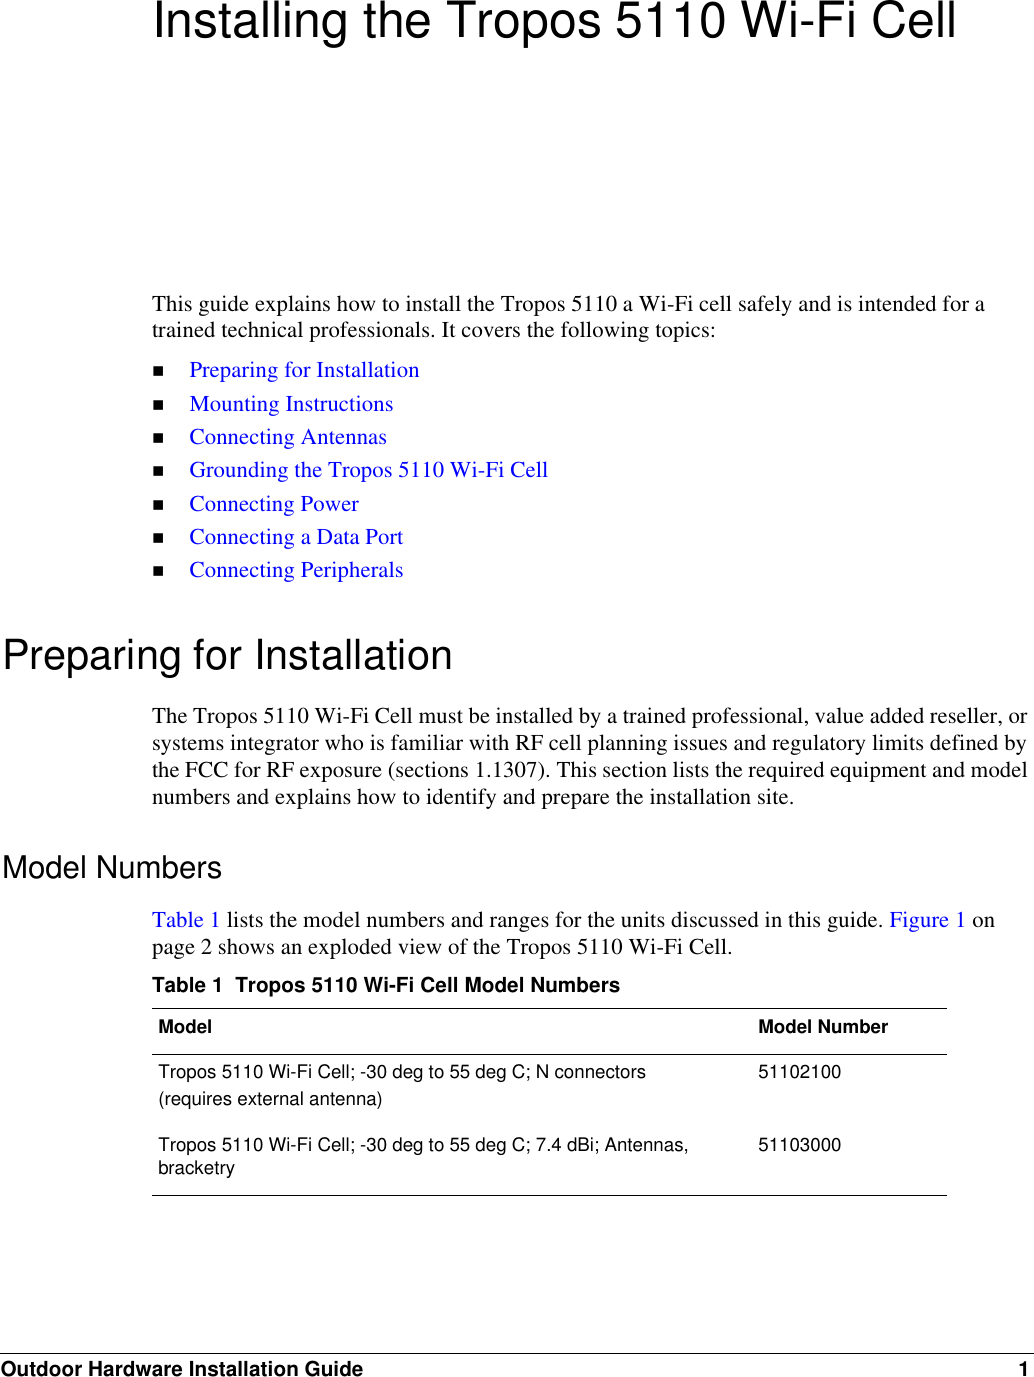 Outdoor Hardware Installation Guide 1Installing the Tropos 5110 Wi-Fi CellThis guide explains how to install the Tropos 5110 a Wi-Fi cell safely and is intended for a trained technical professionals. It covers the following topics:Preparing for InstallationMounting InstructionsConnecting AntennasGrounding the Tropos 5110 Wi-Fi CellConnecting PowerConnecting a Data PortConnecting PeripheralsPreparing for InstallationThe Tropos 5110 Wi-Fi Cell must be installed by a trained professional, value added reseller, or systems integrator who is familiar with RF cell planning issues and regulatory limits defined by the FCC for RF exposure (sections 1.1307). This section lists the required equipment and model numbers and explains how to identify and prepare the installation site.Model NumbersTable 1 lists the model numbers and ranges for the units discussed in this guide. Figure 1 on page 2 shows an exploded view of the Tropos 5110 Wi-Fi Cell.Table 1  Tropos 5110 Wi-Fi Cell Model NumbersModel Model NumberTropos 5110 Wi-Fi Cell; -30 deg to 55 deg C; N connectors(requires external antenna)51102100Tropos 5110 Wi-Fi Cell; -30 deg to 55 deg C; 7.4 dBi; Antennas, bracketry 51103000